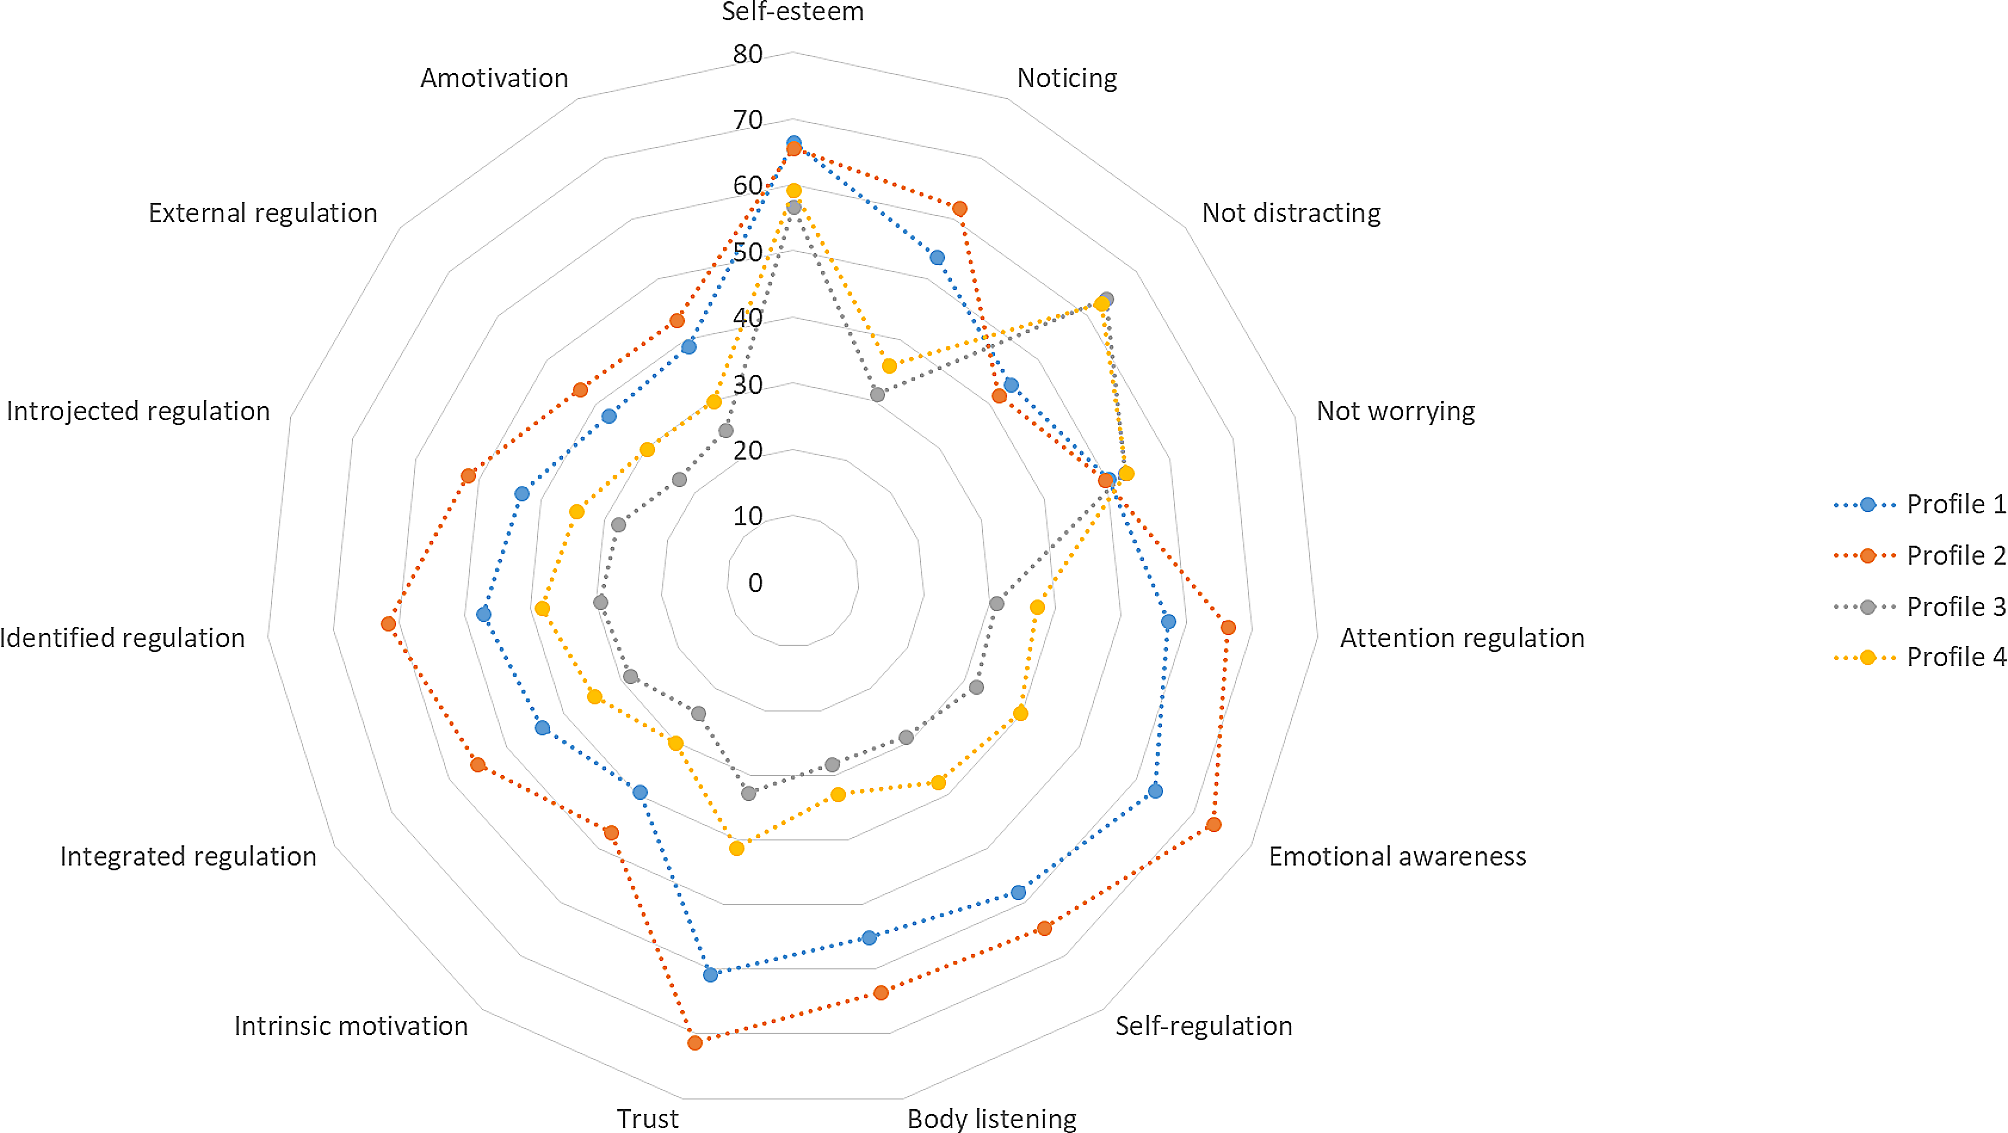 Profiles of intuitive eating in adults: the role of self-esteem, interoceptive awareness, and motivation for healthy eating